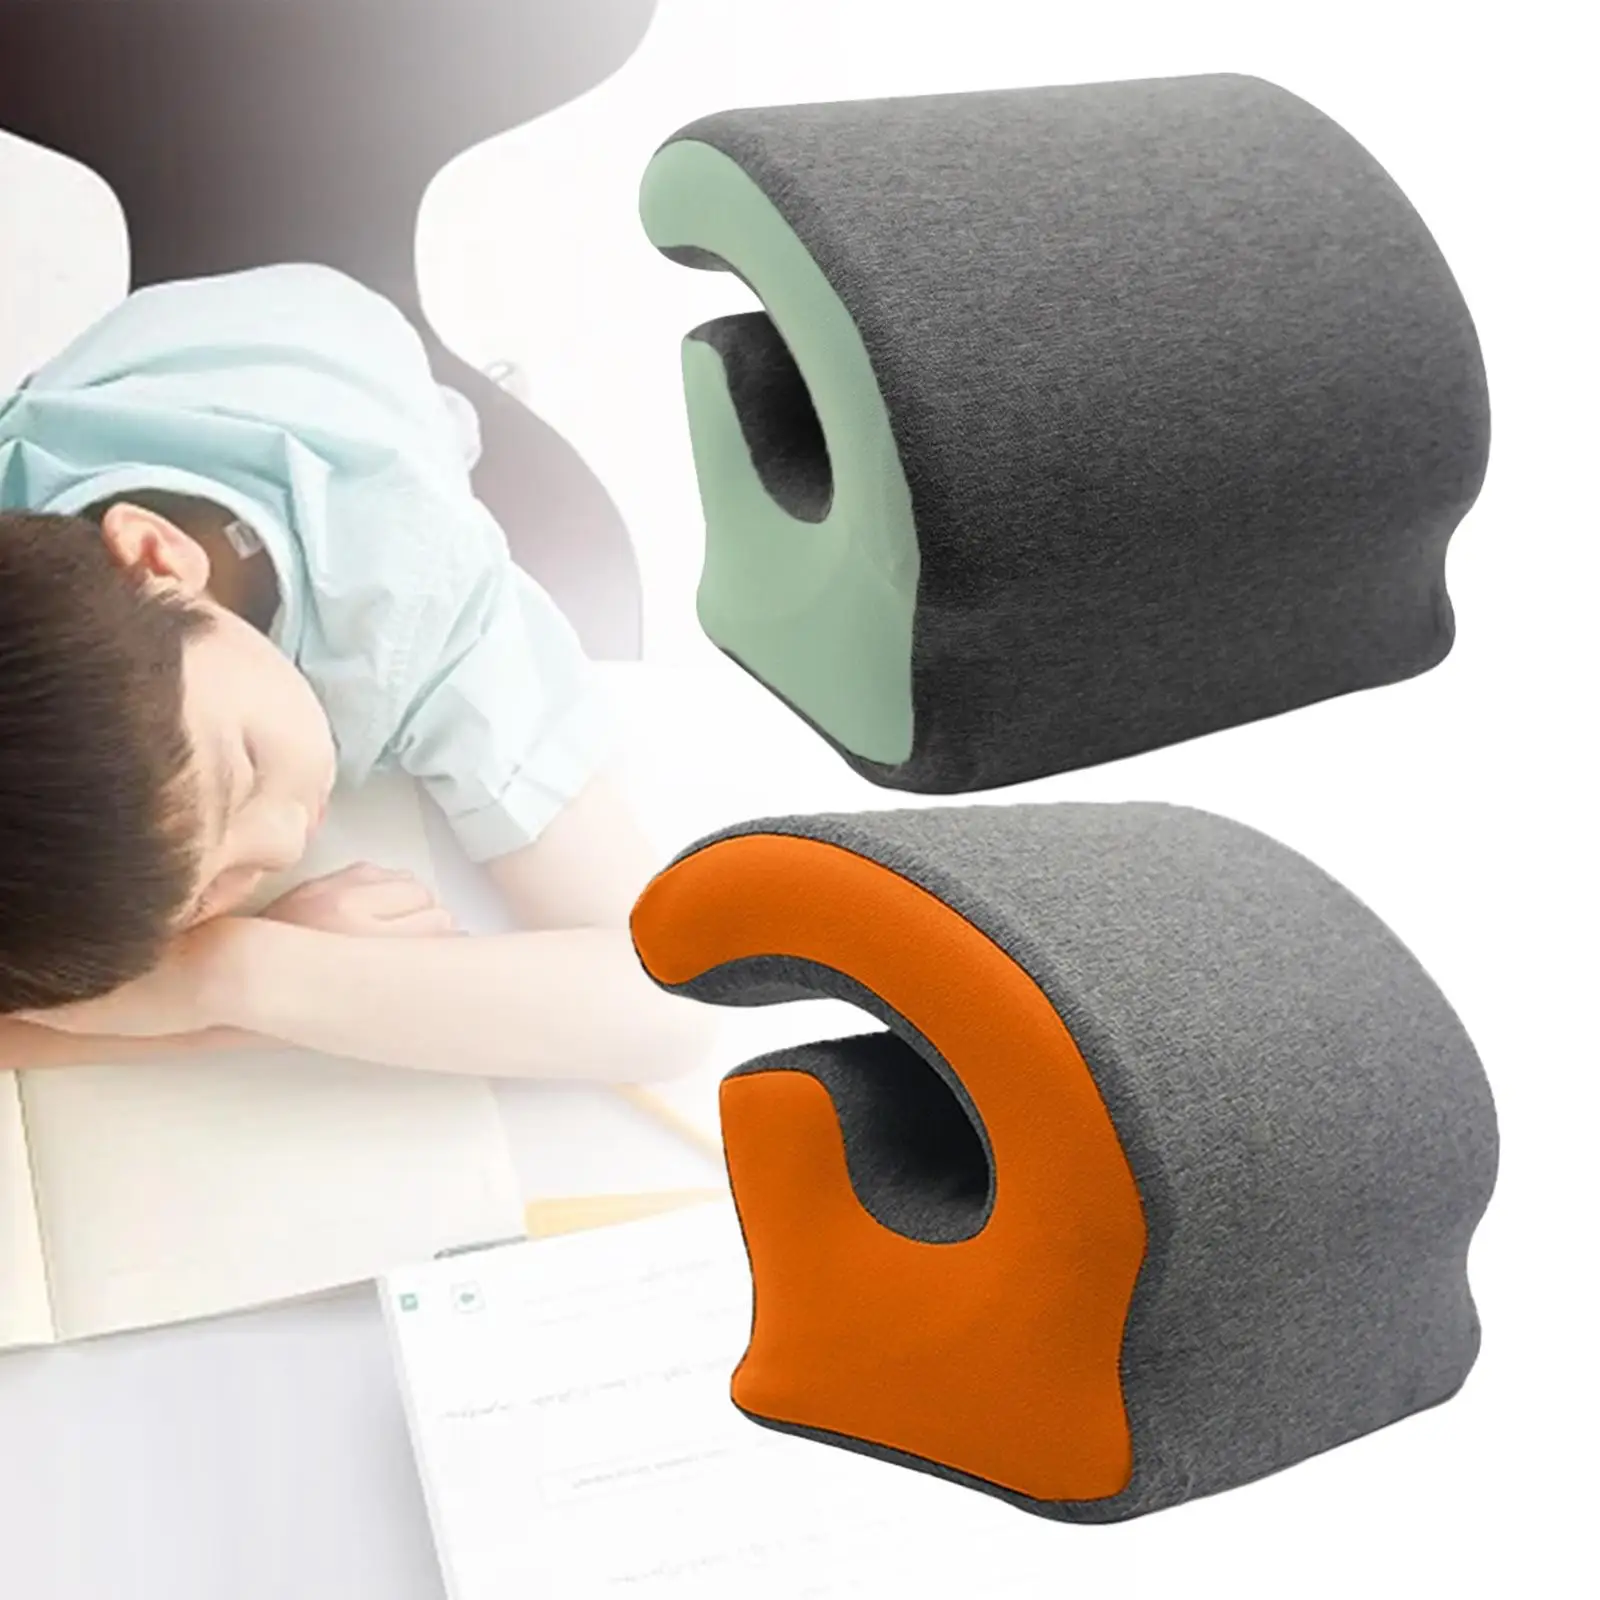 Desk Napping Pillow Removable Cover Sleeping Adults Comfortable Washable Portable Travel Pillow for Airplane School Car Train